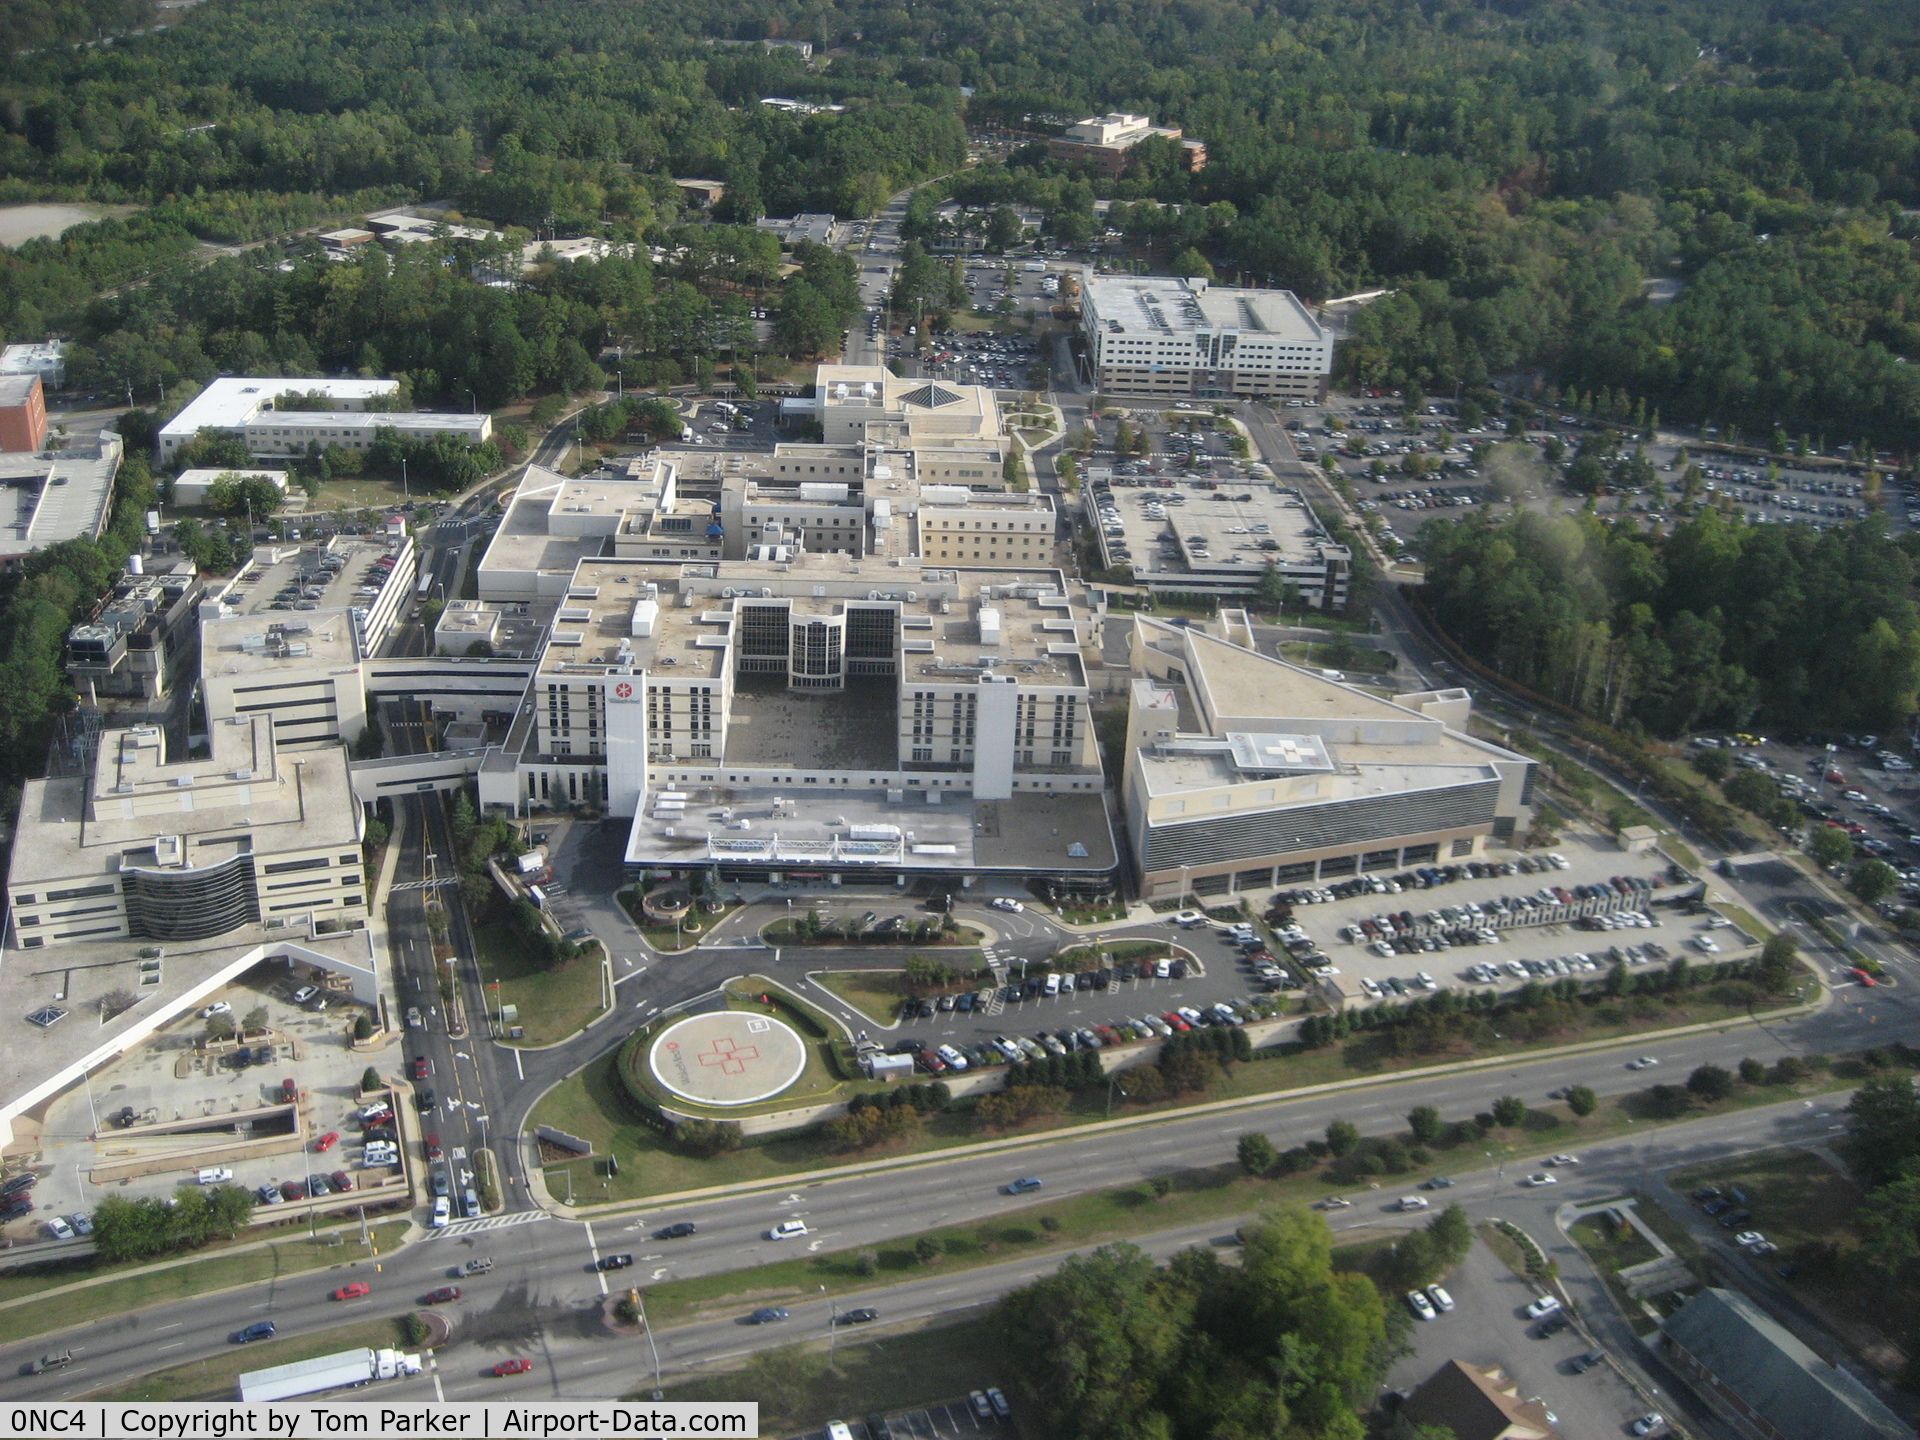 Wake Medical Center Heliport (0NC4) - WakeMed Raleigh Campus